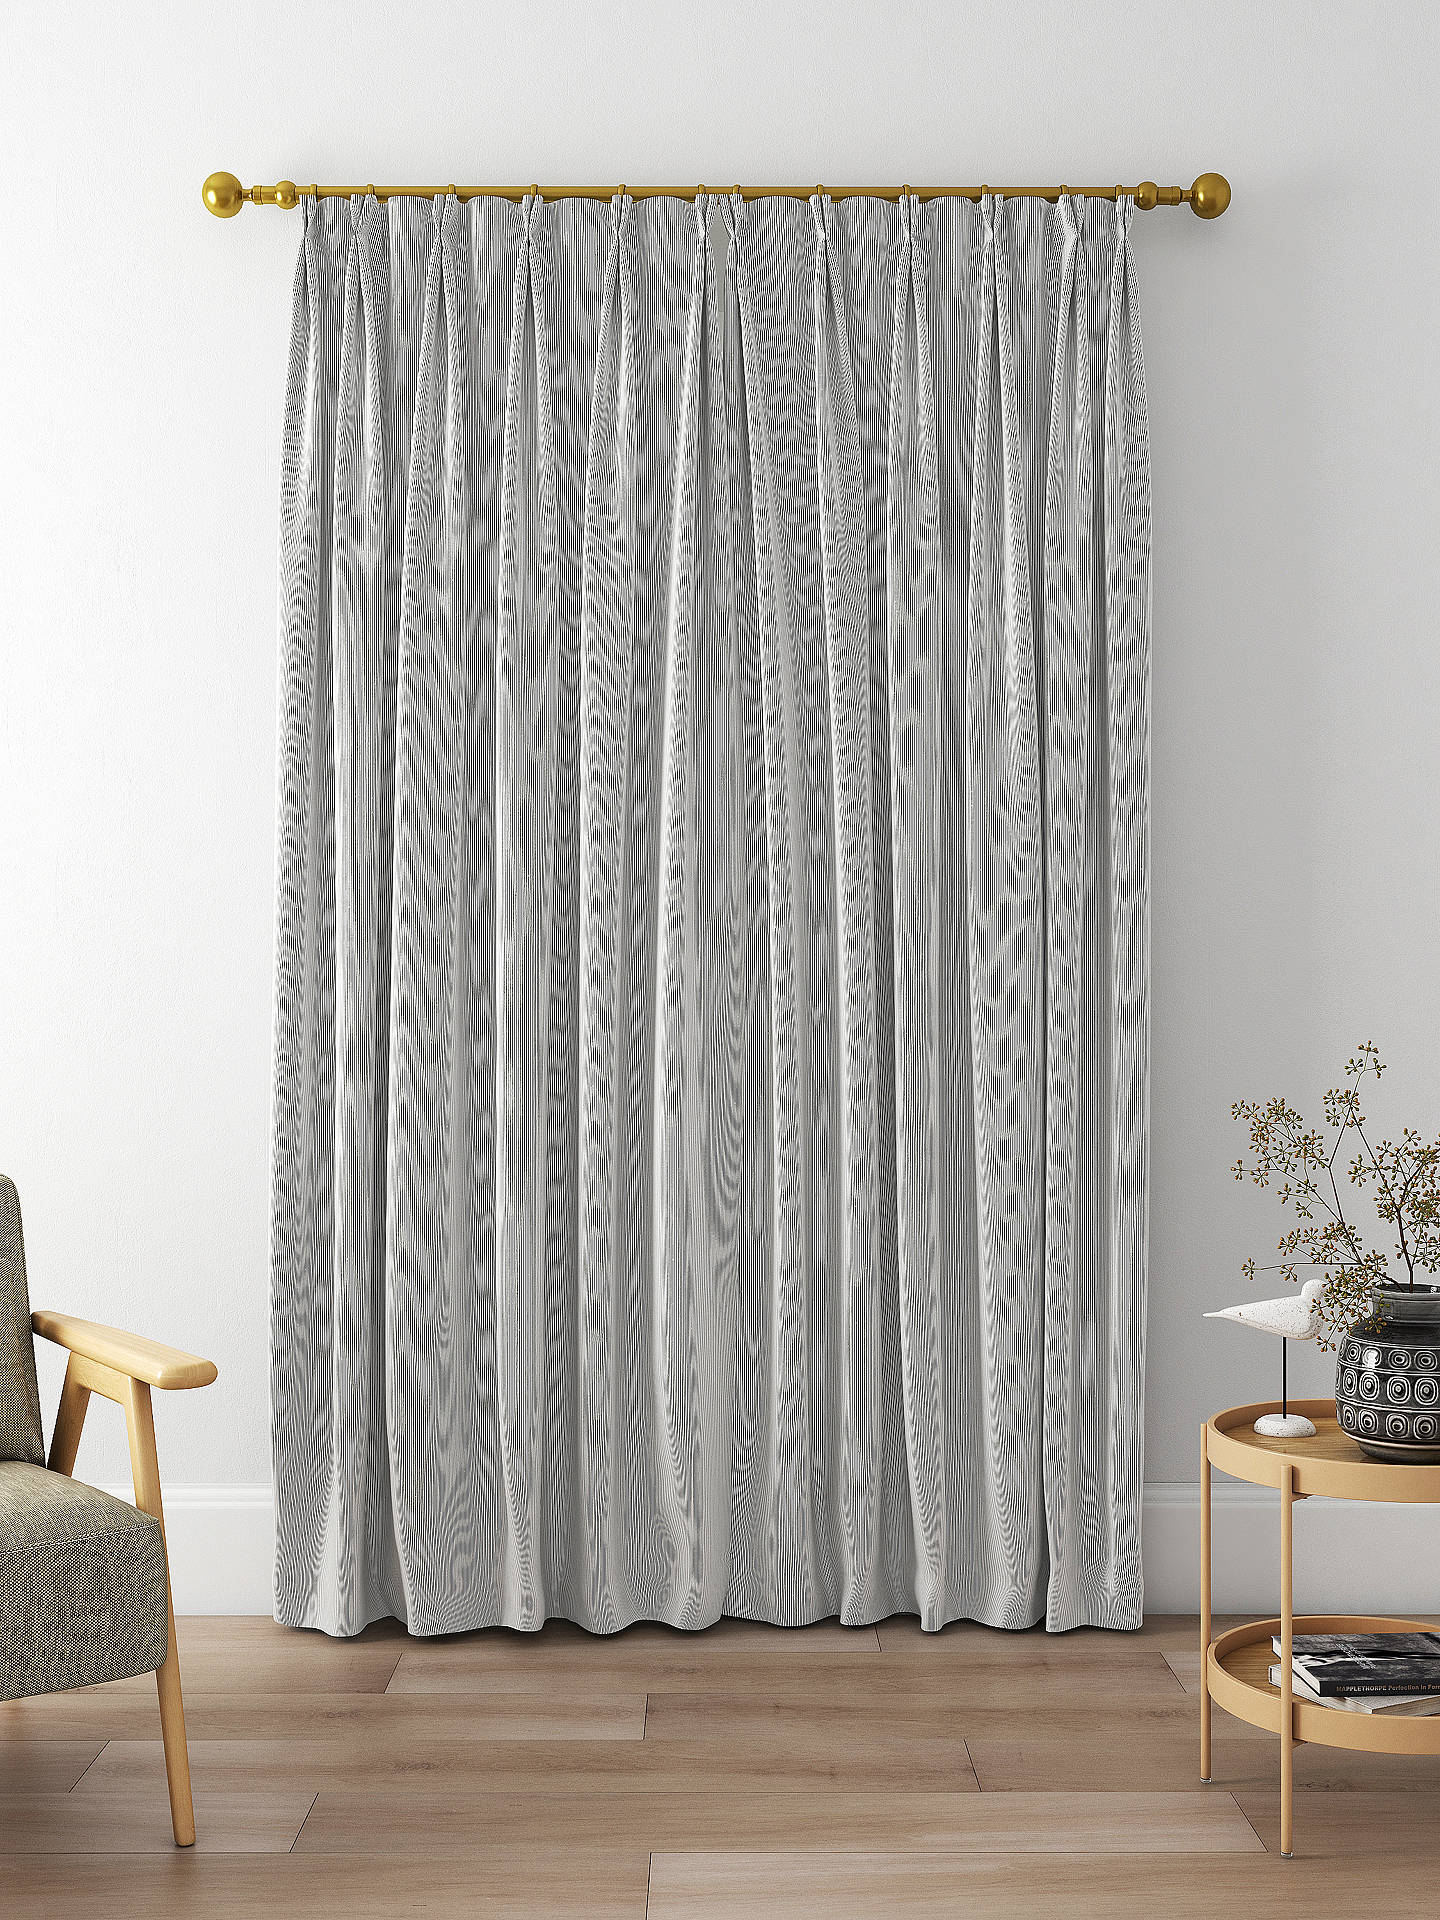 Clarke & Clarke Breton Made to Measure Curtains, Charcoal